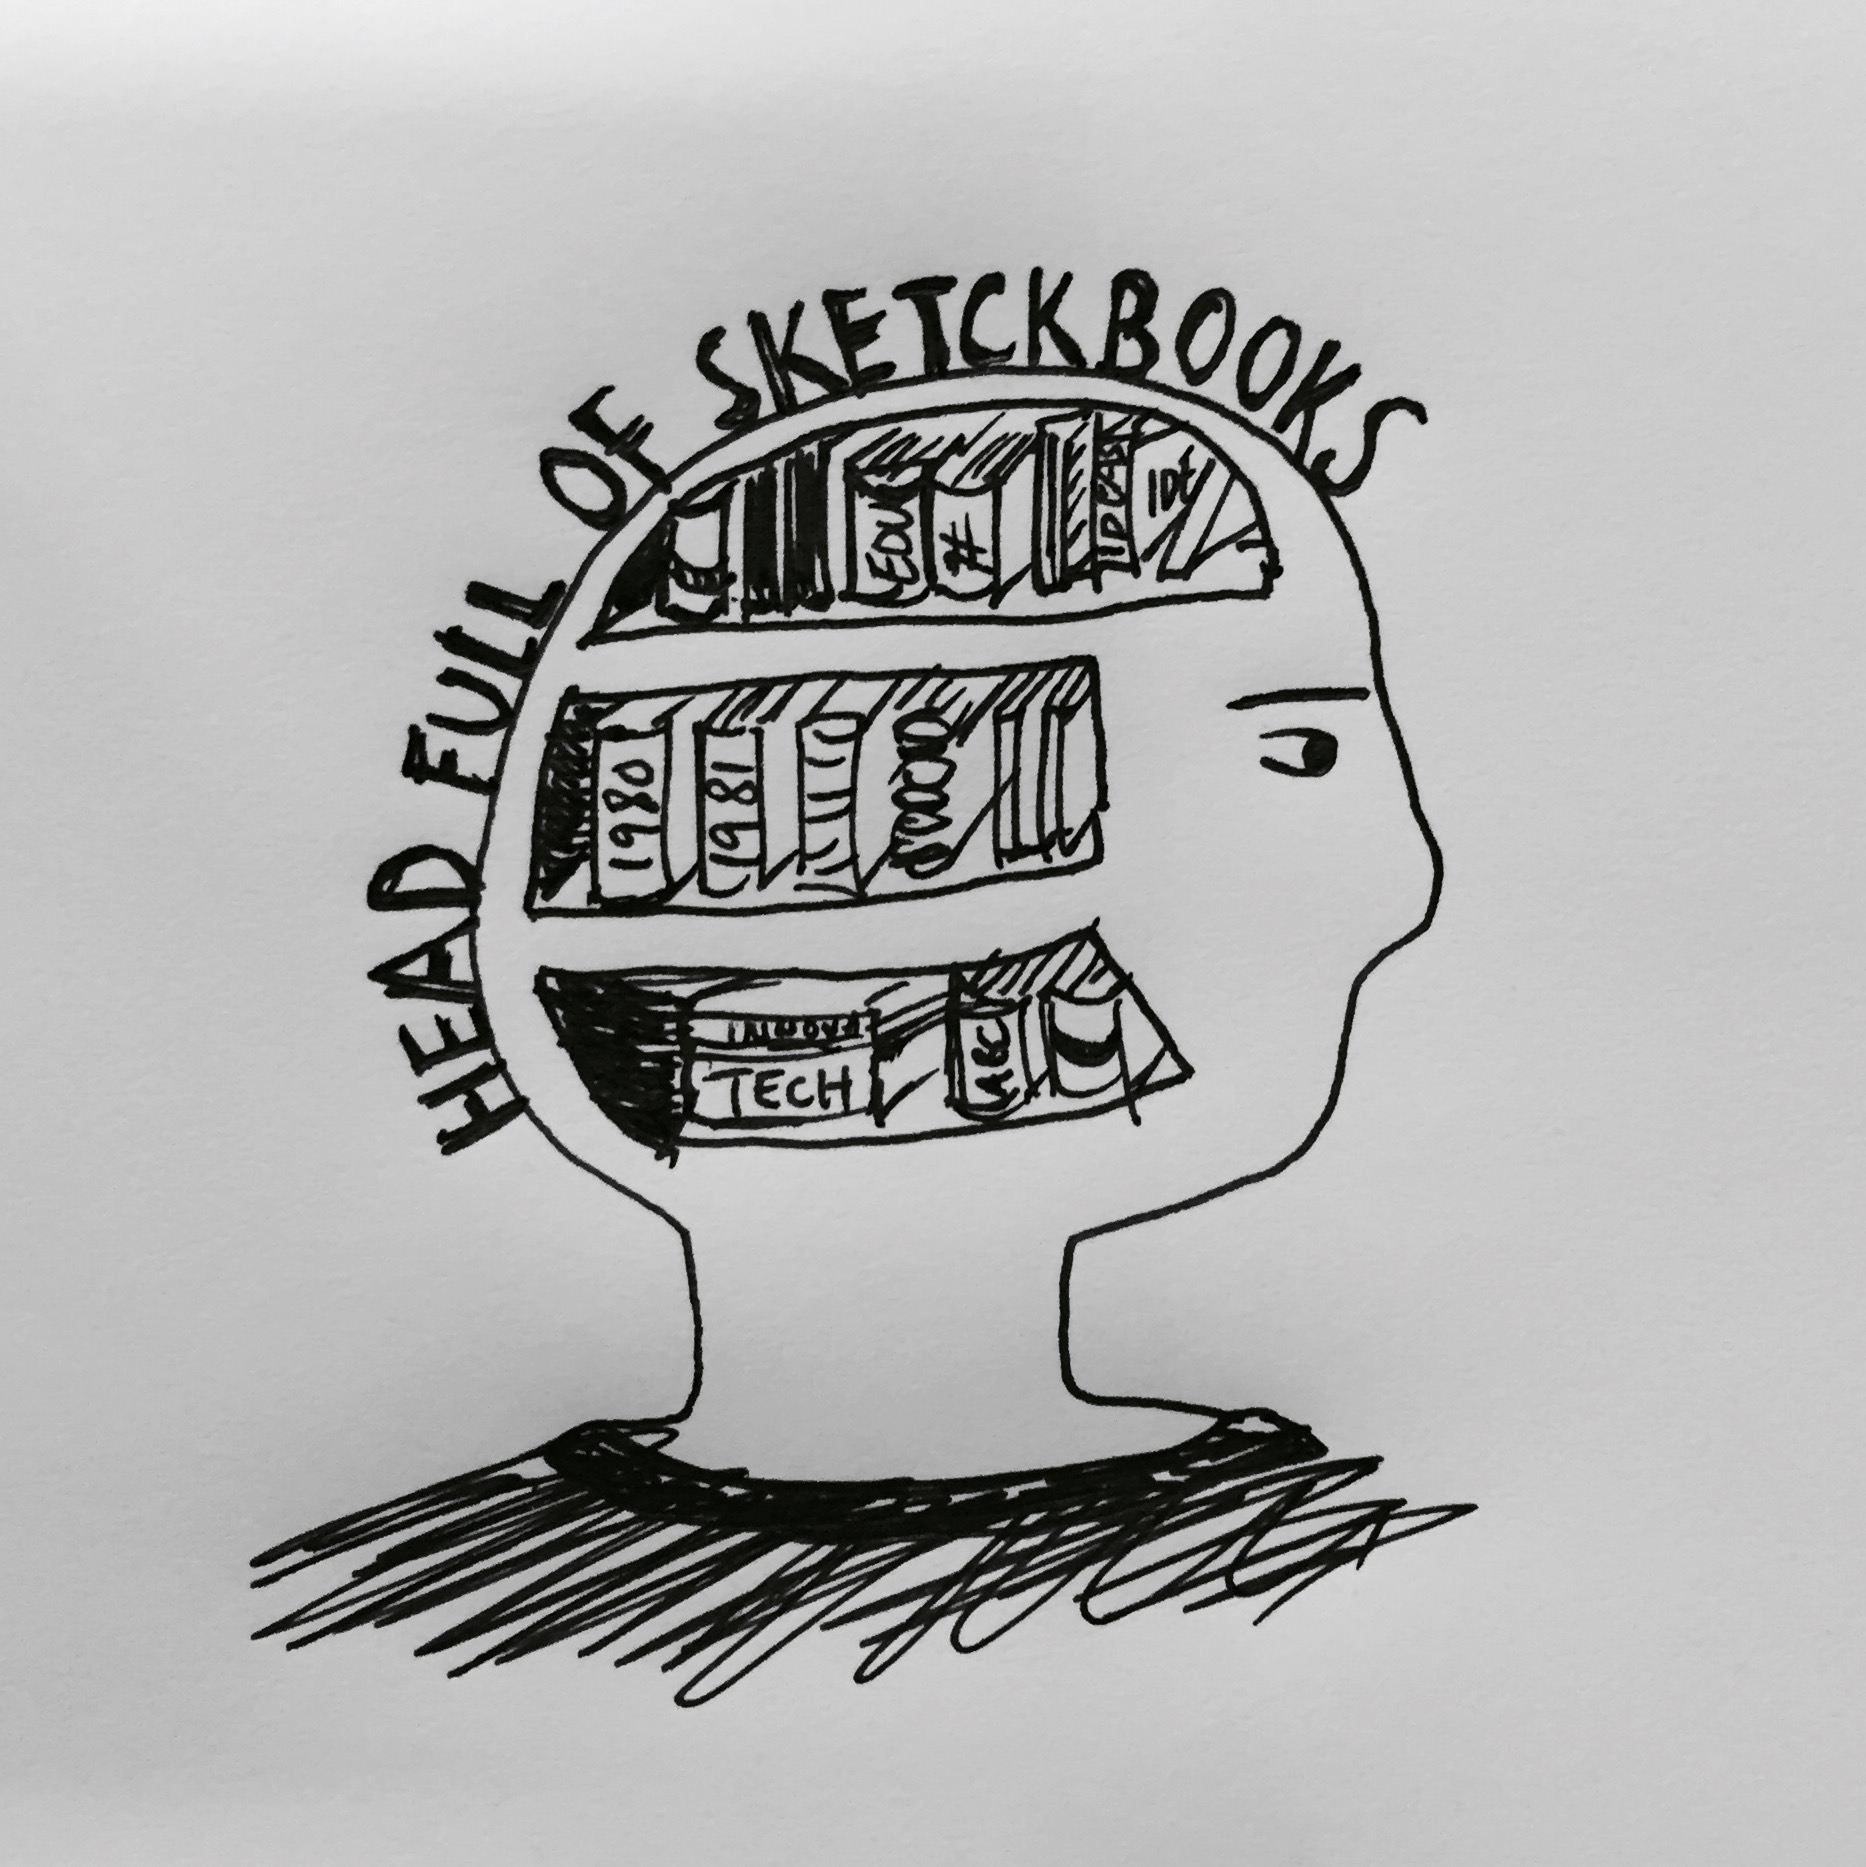 Line drawing of a head full of sketchbooks